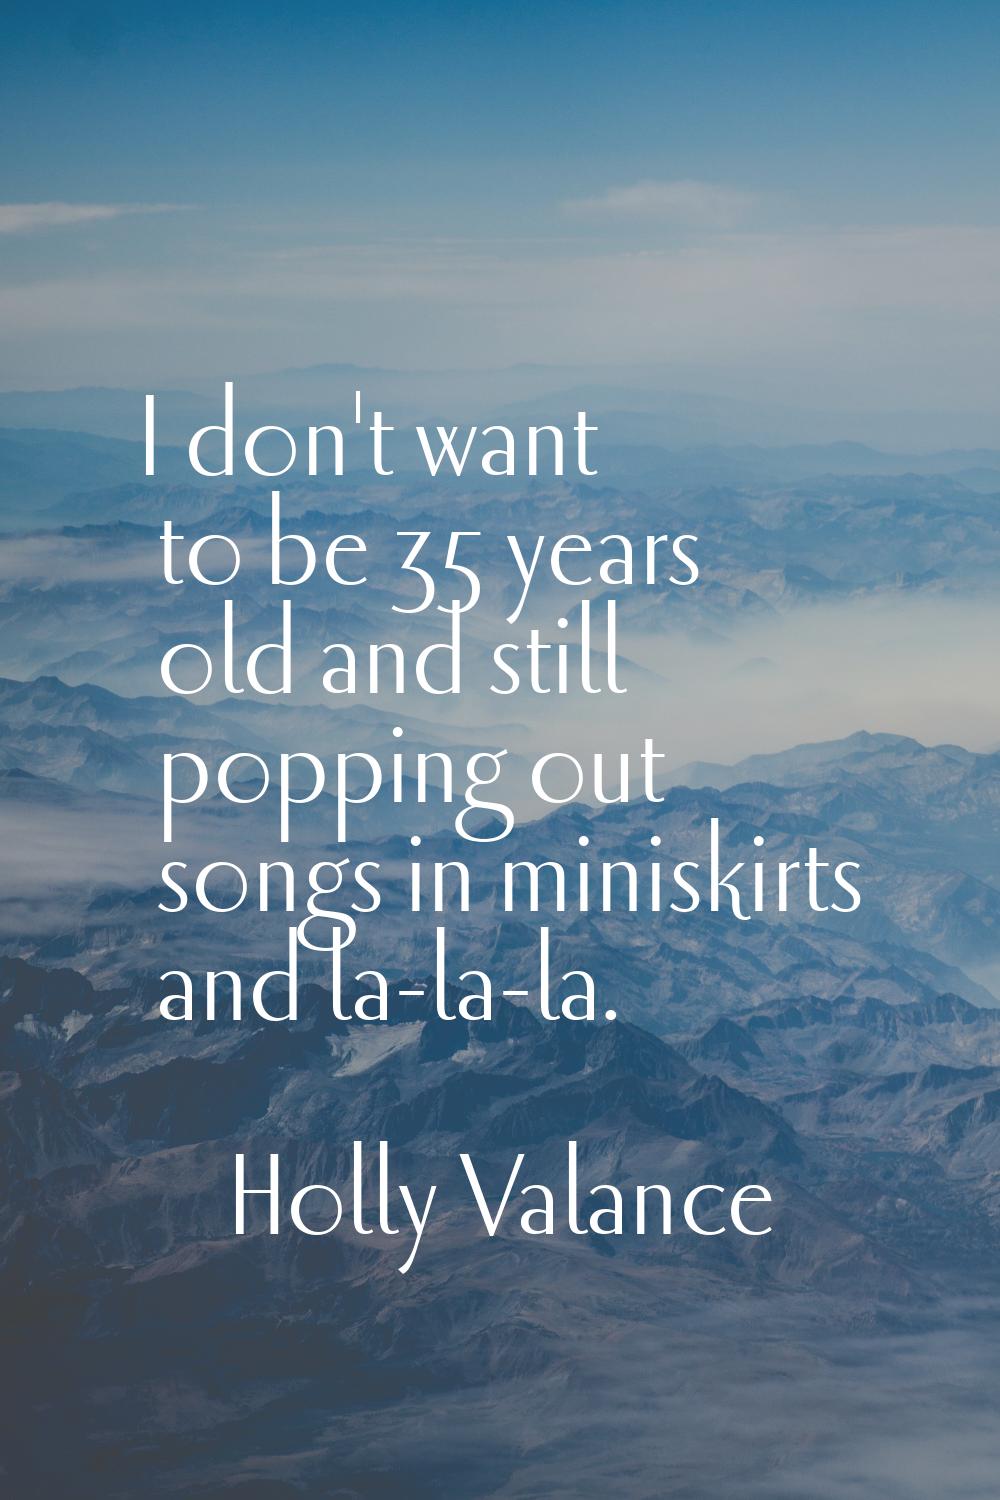 I don't want to be 35 years old and still popping out songs in miniskirts and la-la-la.